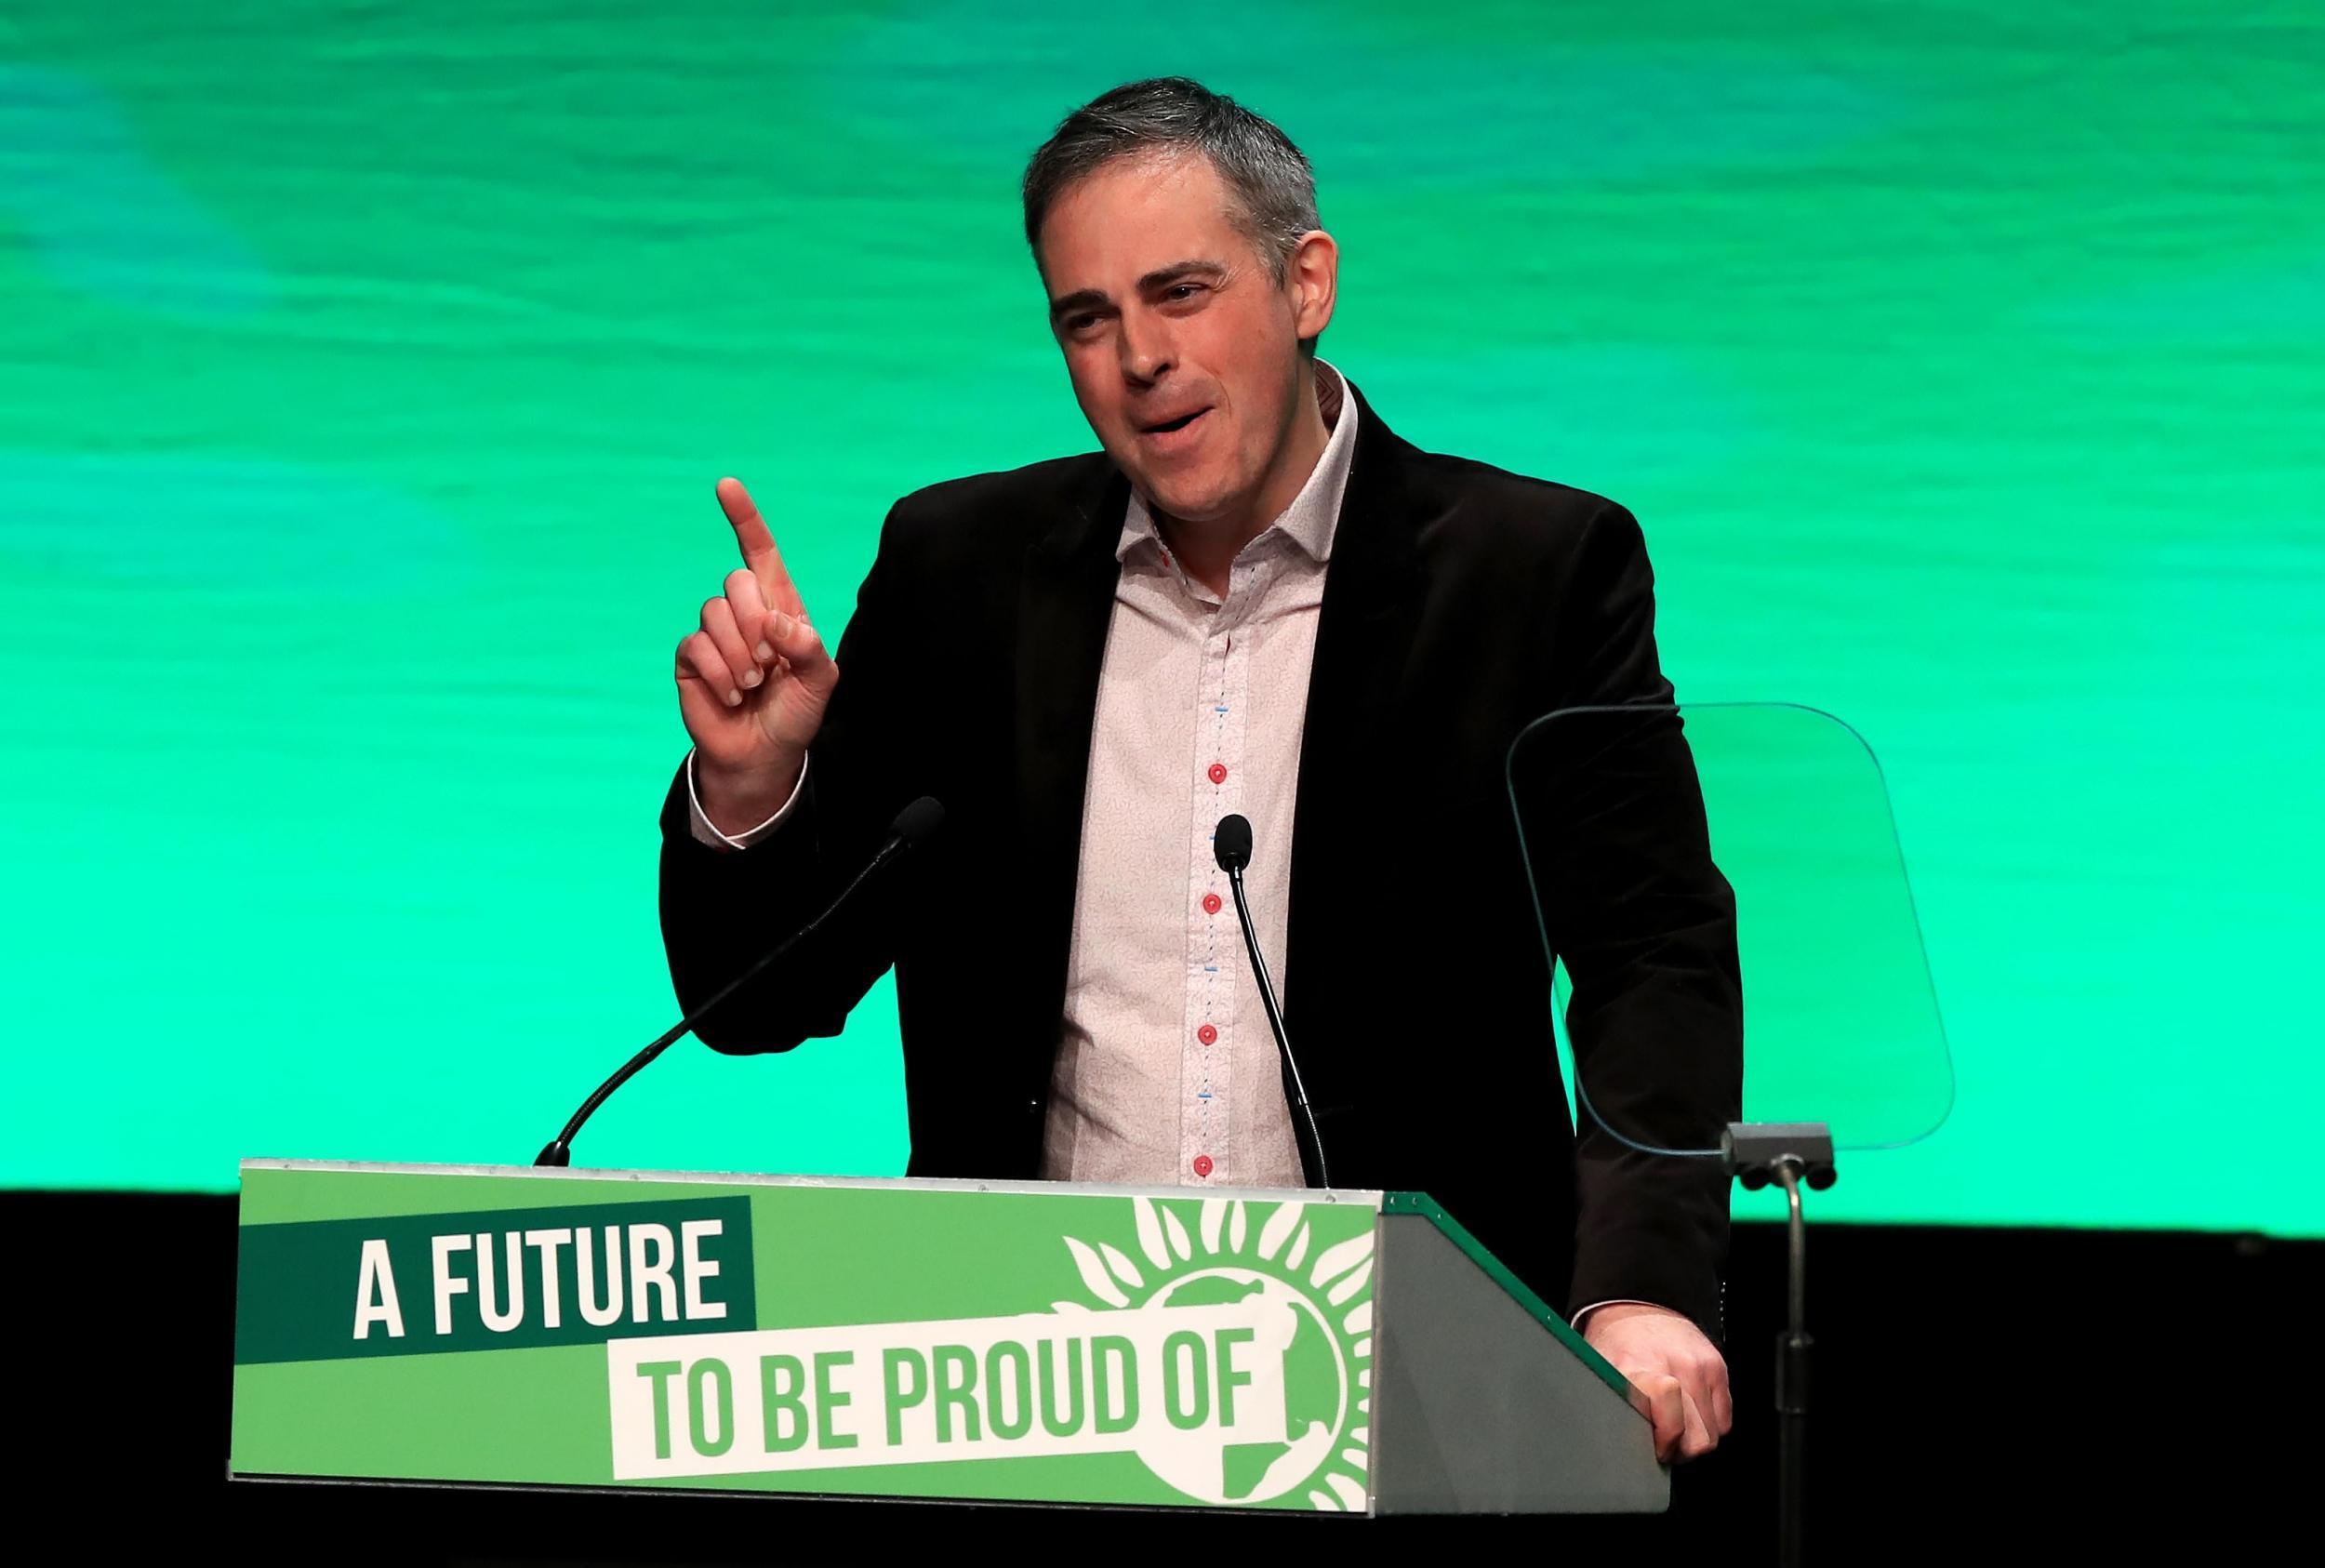 Co-leader of the Green Party Jonathan Batley has accused the Tories of "waging war" against young people